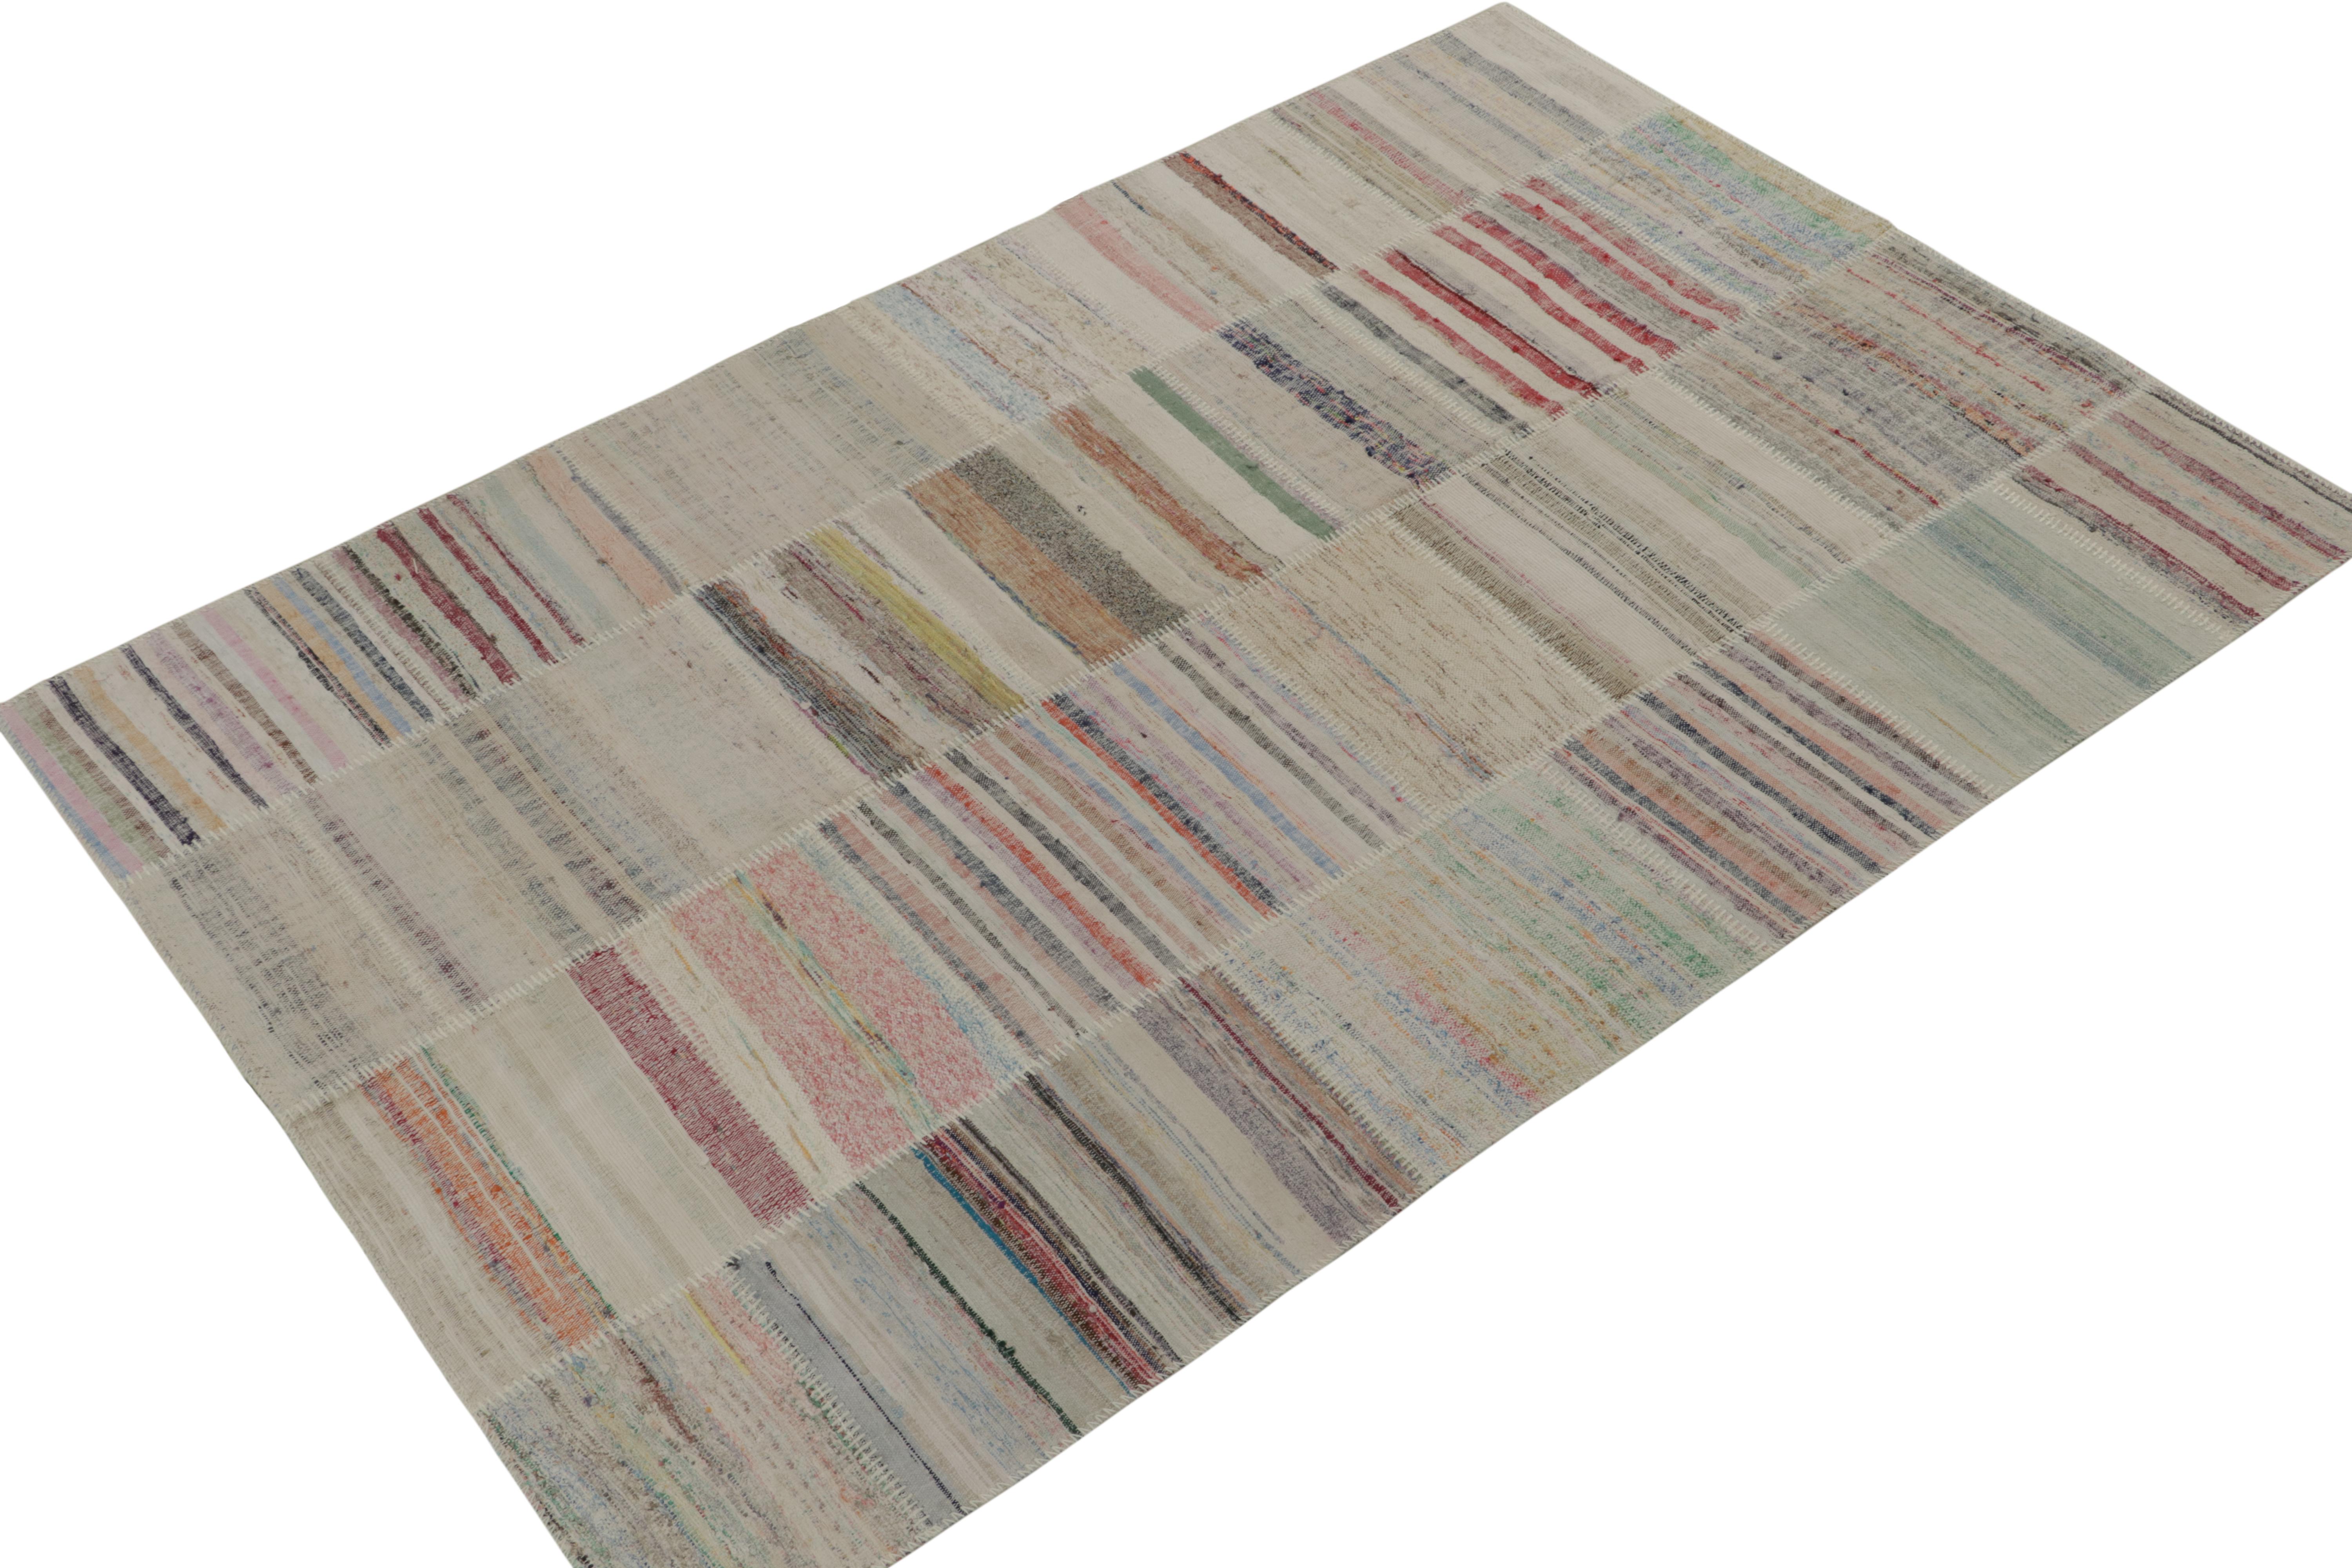 Handwoven in wool, Rug & Kilim presents a 6x9 contemporary rug from their innovative new patchwork kilim collection. 

On the Design: 

This flat weave technique repurposes vintage yarns in polychromatic stripes and striae, achieving a playful look